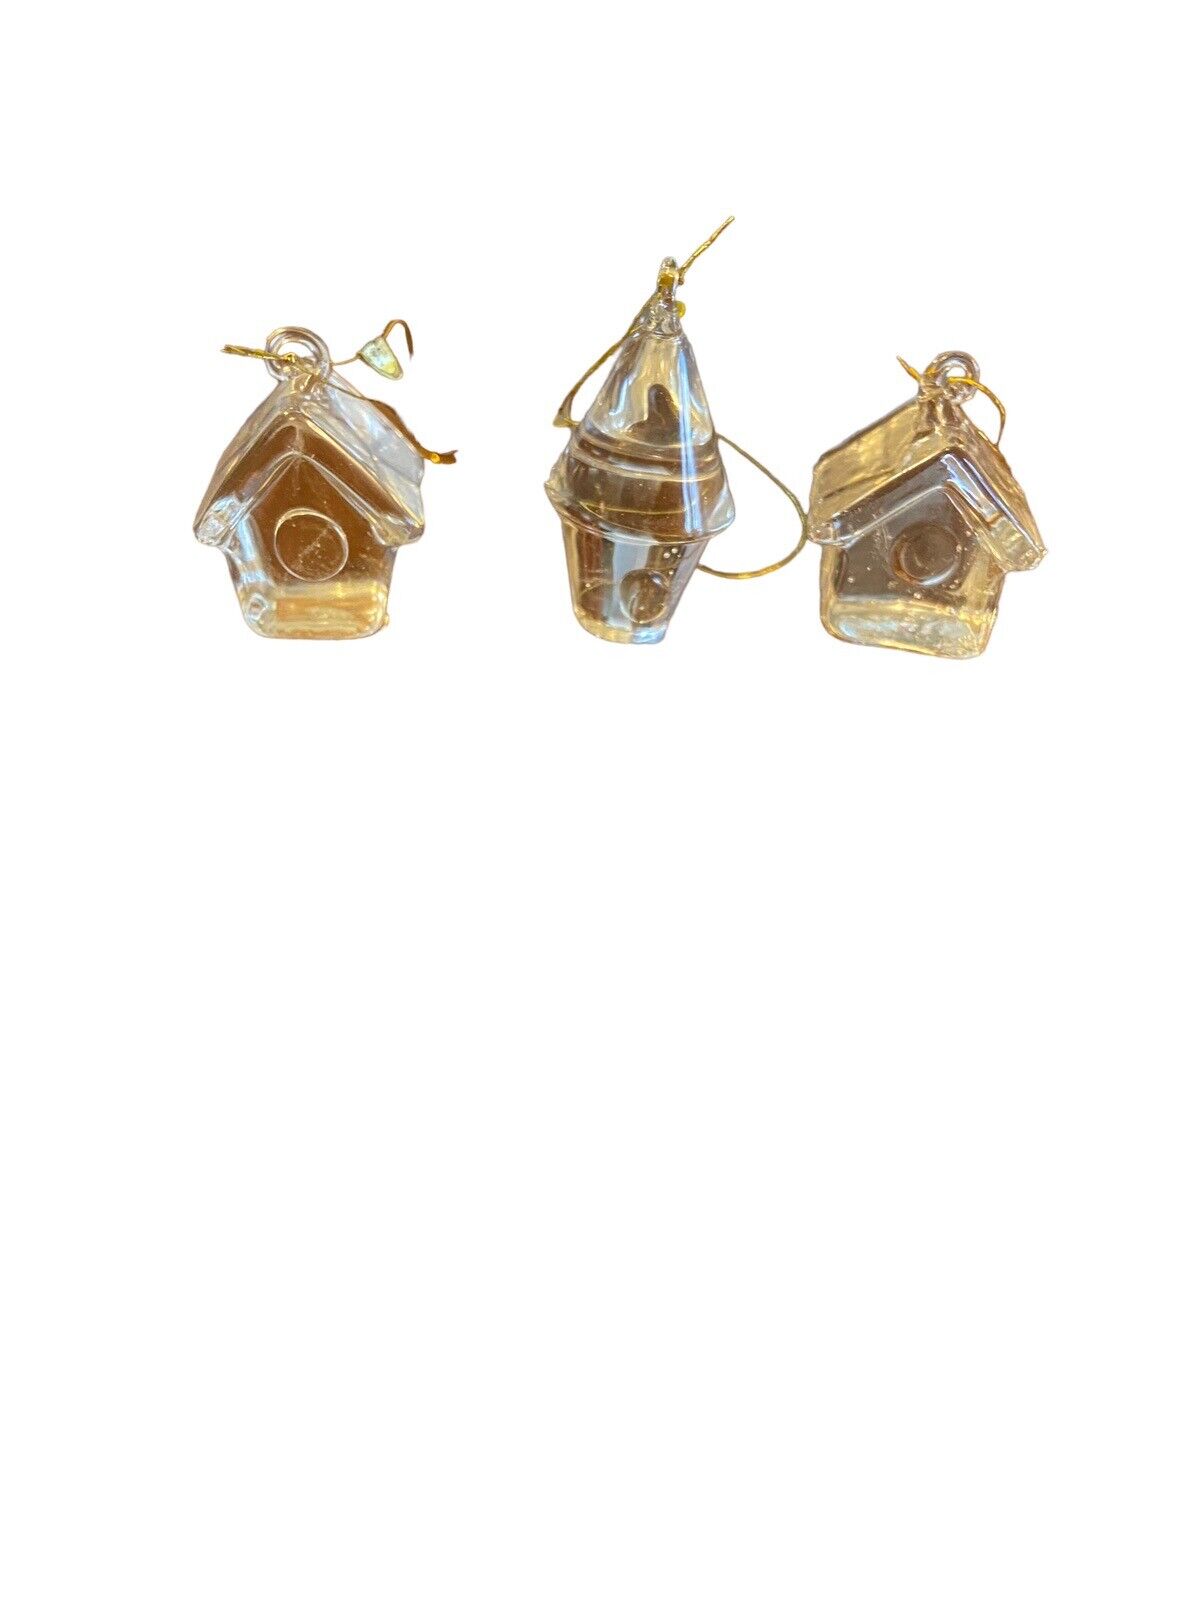 35 Mini Solid Clear Glass Bird House Ornaments. Three Kinds. Gold String